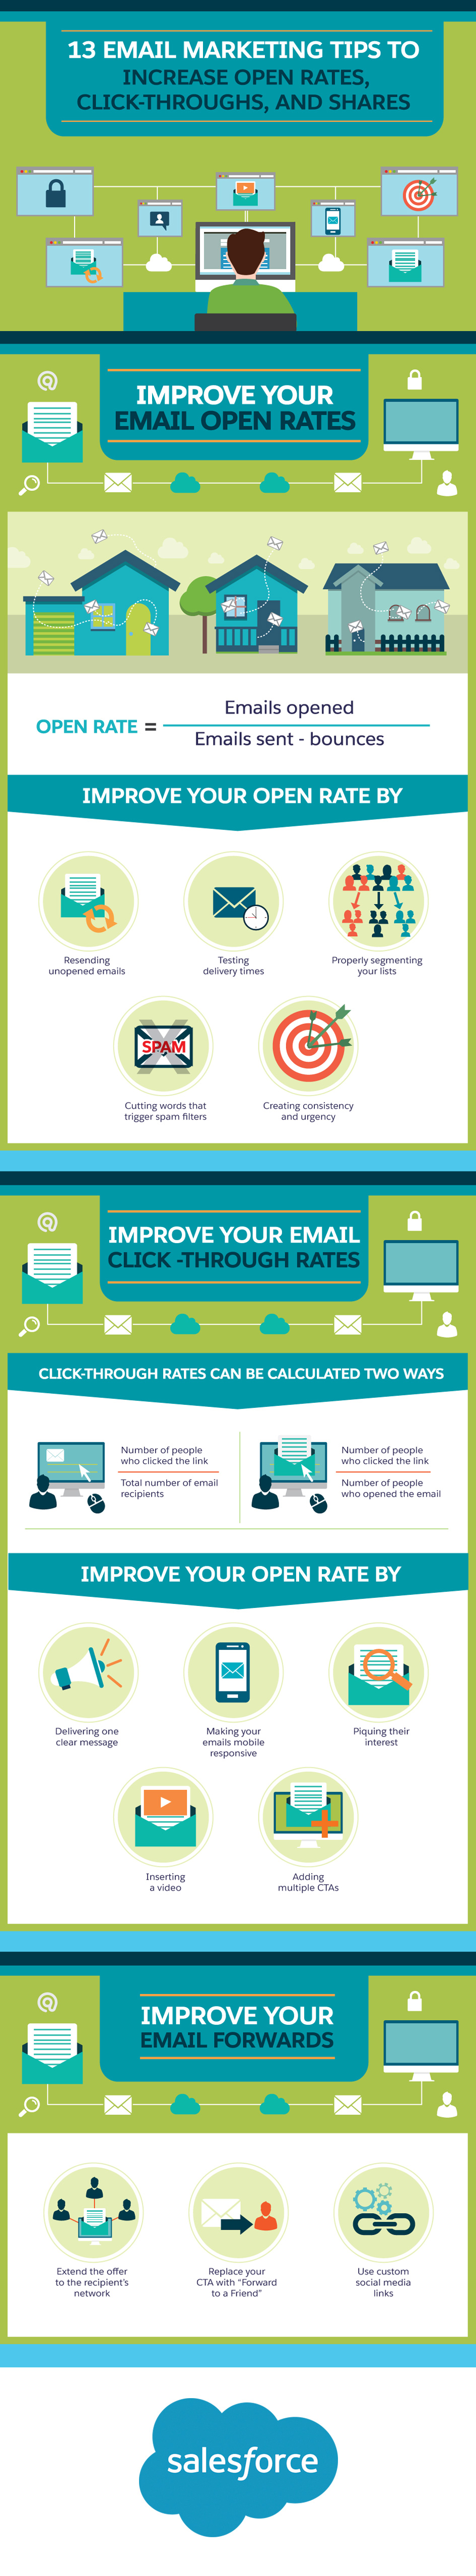 13 Email Marketing Tips to Increase Open Rates, Click-Throughs, and Shares